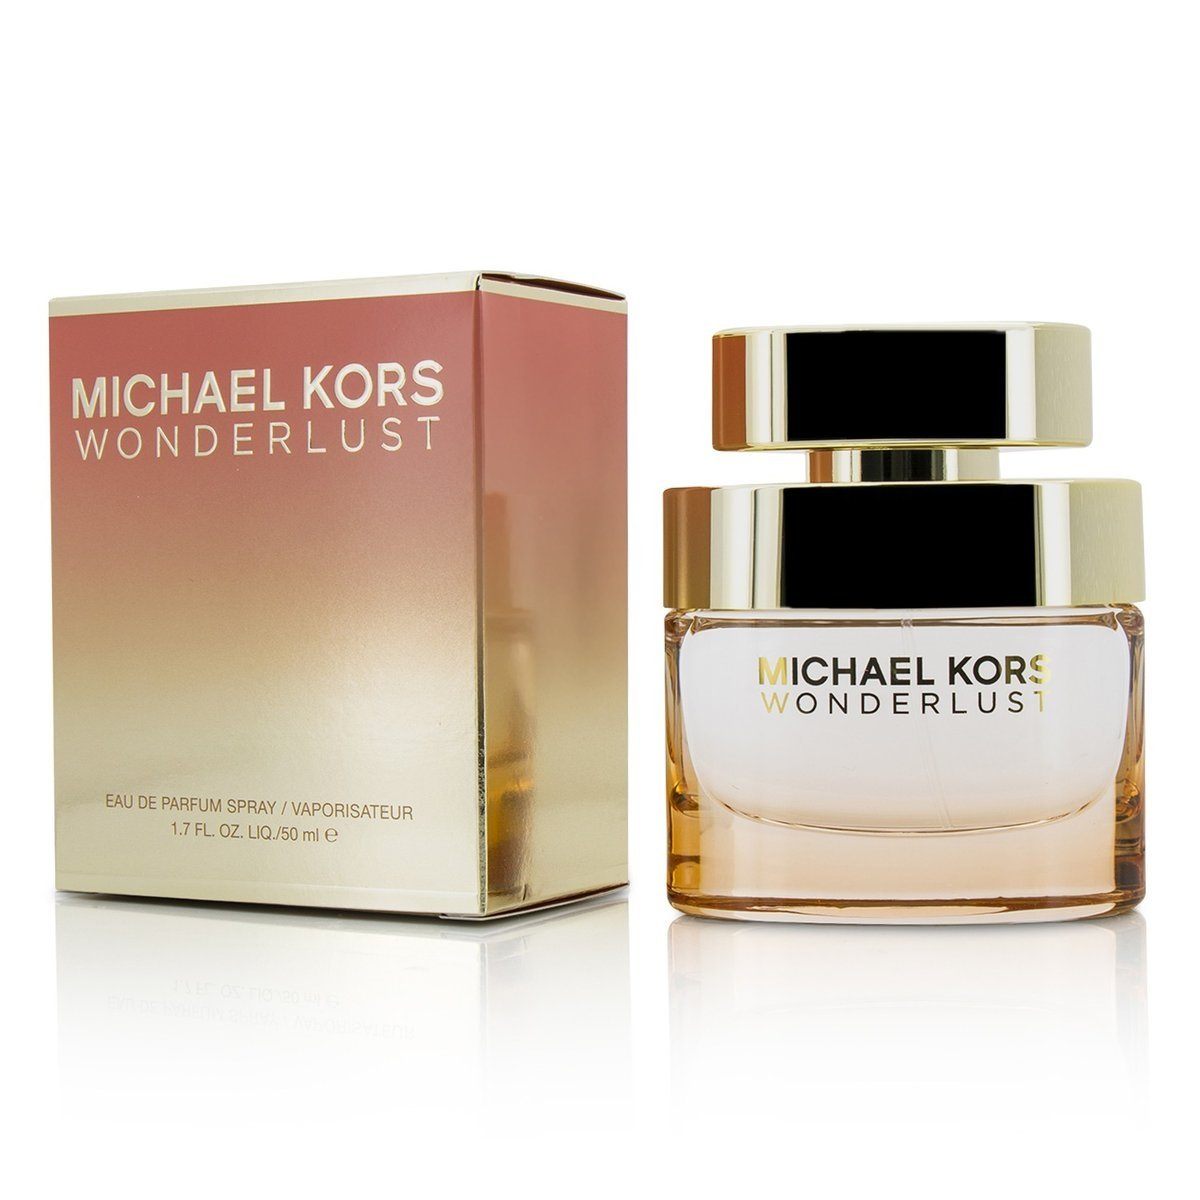 Introduced in 2016. The concept of “escape” is central to the WONDERLUST story, Michael Kors told WWD. This story, he elaborated, includes a corresponding ad and video campaign depicting the face of the scent: a gold, sequined-dress-clad Lily Aldridge, in an unknown far-flung locale. She is escaping from a yacht into a small speedboat with her paramour, Dutch model Wouter Peelen, into a rose-fueled sunset. As a game on words, Wanderlust (which denotes a great wish of travelling) is the desire for escape in Kors’ collection. The campaign was developed by Mario Testino. The composition of the new fragrance was created in partnership with Firmenich by perfumers Honorine Blanc and Aurelien Guichard, as gourmand (a synthetic note with “edible,” sweet qualities). The focus lies on the dianthus flower to give Wonderlust the feel of an almond milk that’s been blended with a “spicy, creamy floral.” Top notes of almond milk are accompanied by heliotrope placed at the hart of the fragrance. The base of the composition provides benzoin, a natural resin from Thailand leaving the impression of warmth, and the spicy sweetness of cinnamon. "I wanted something that’s feminine, not in an insipid way, but in a streamlined, modern way. It’s the same way with the gourmand. The almond milk has something delicious, but not edible or sticky," the designer continued. "Our girl is looking for a way to experience and have fun but stay within her wrld." as explained by Michael Kors.